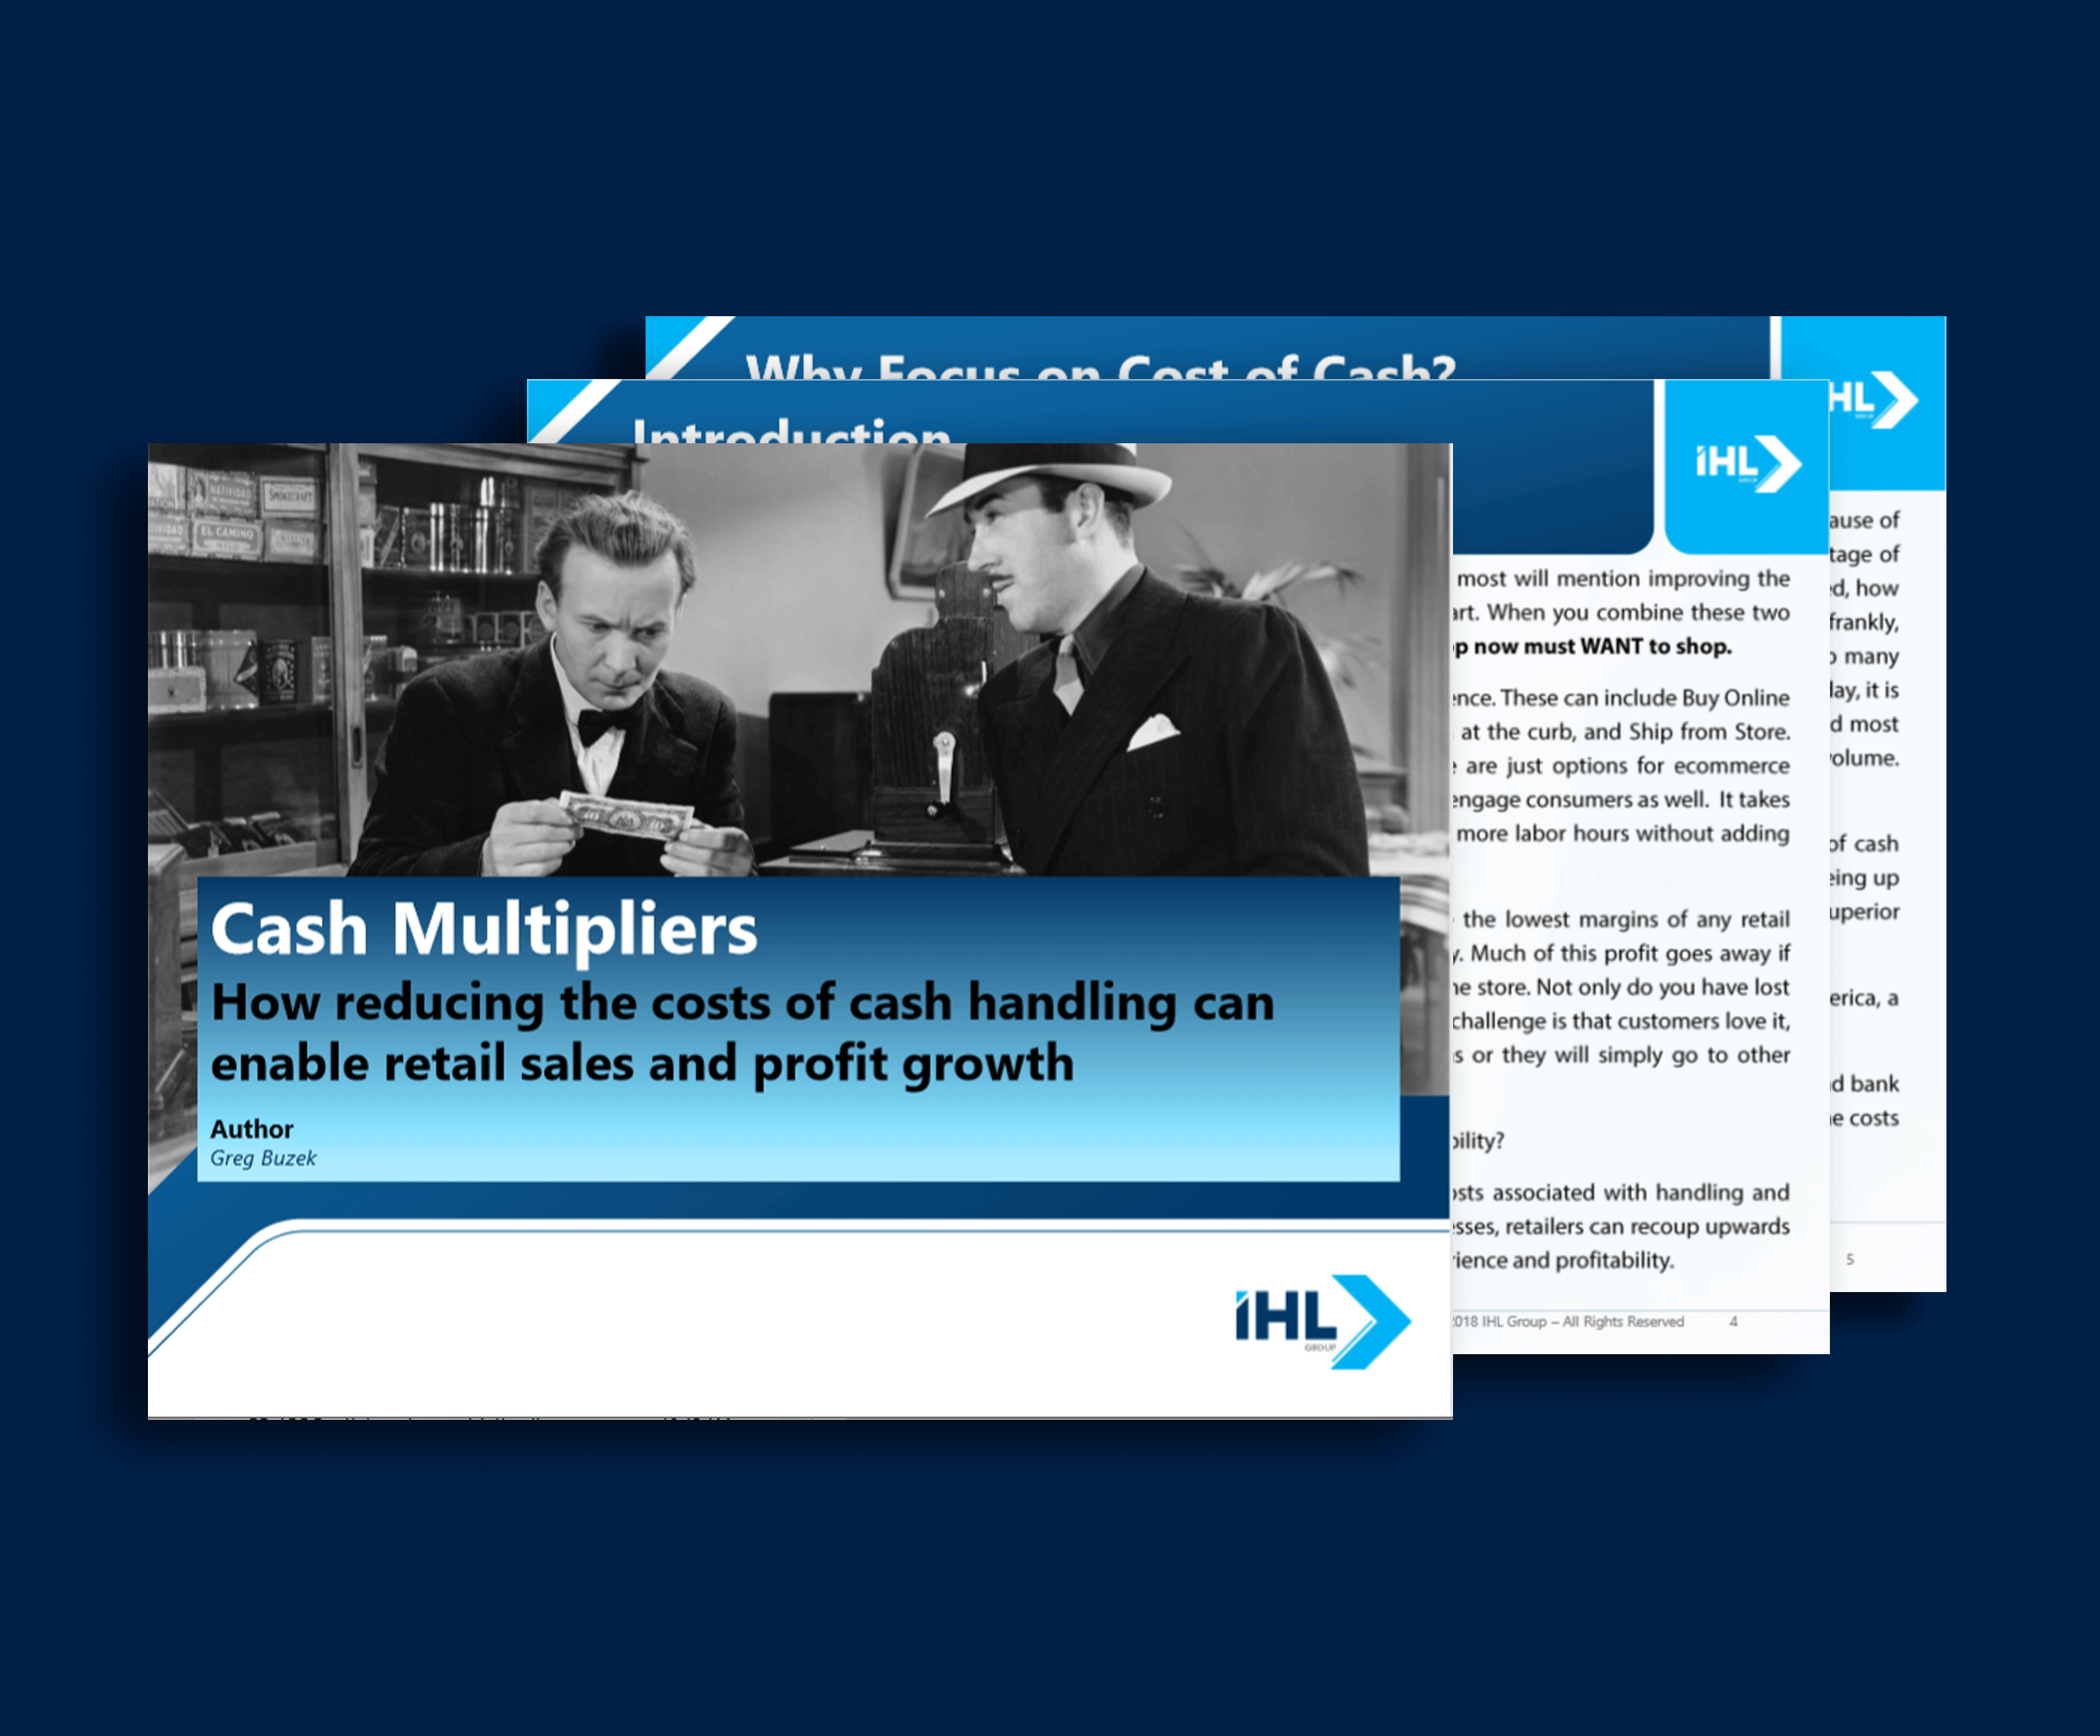 Cash Multipliers Study by IHL